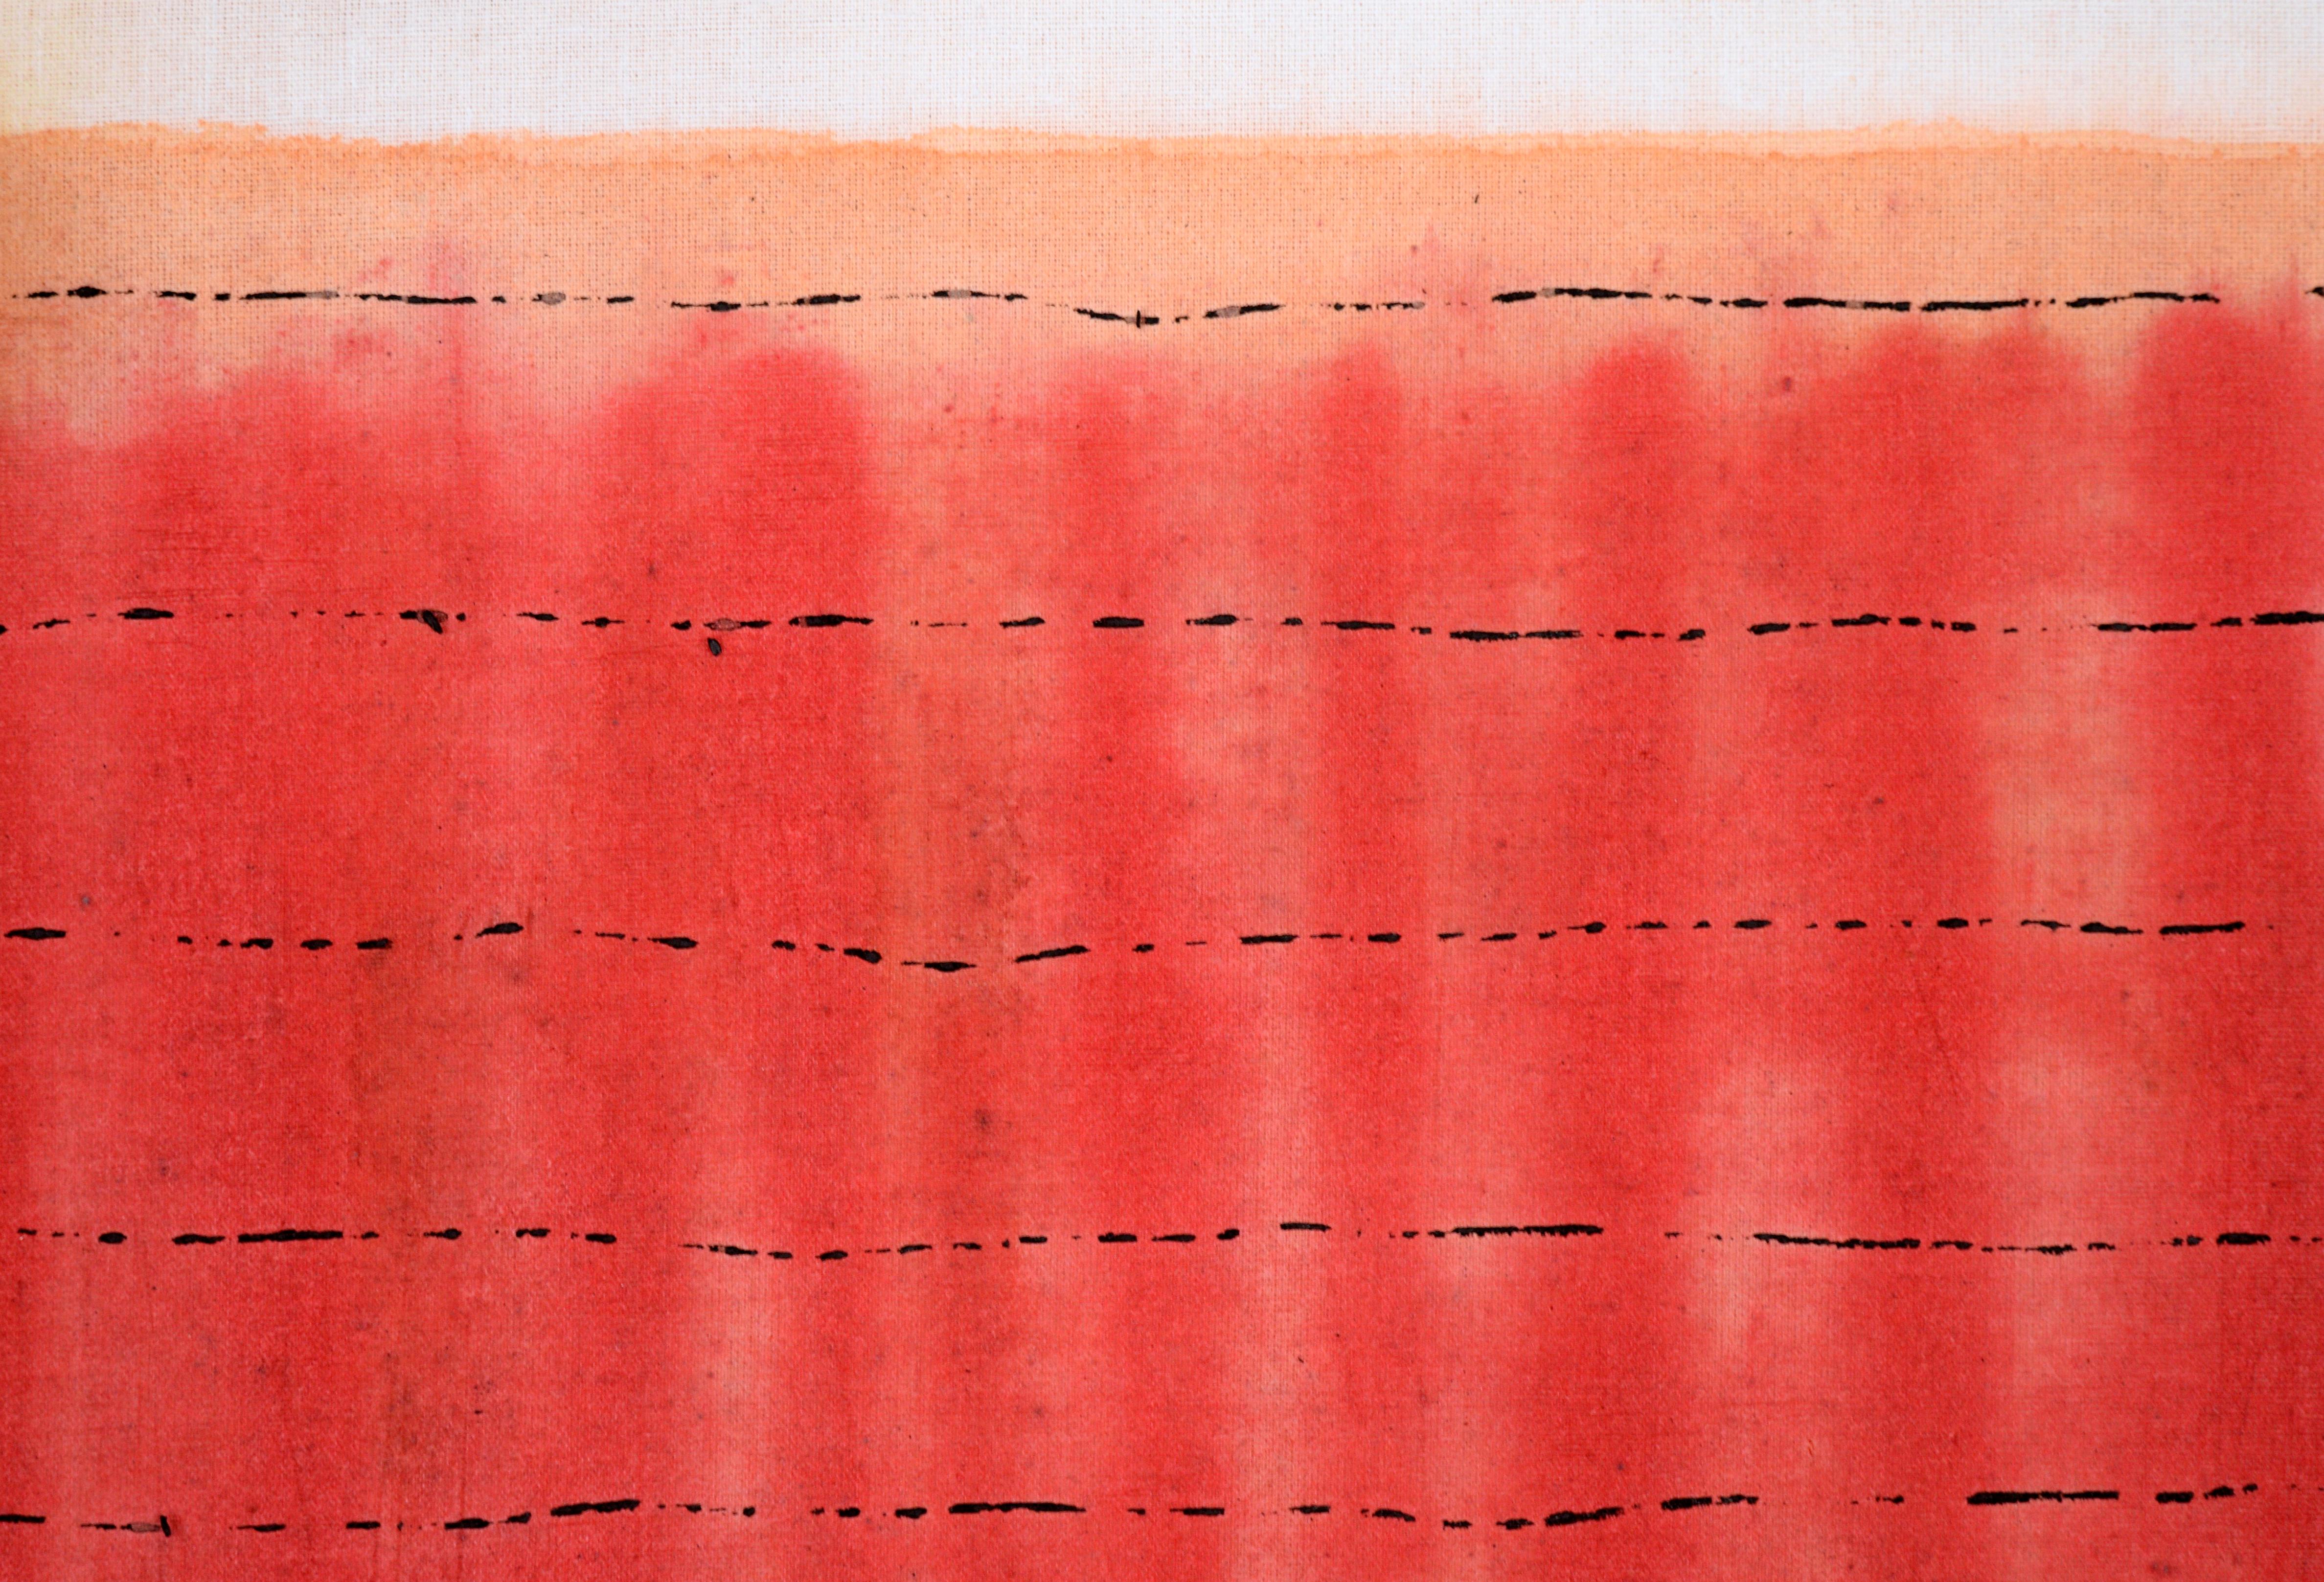 Bright abstract by D. Whelan (American, 20th Century). Vertical strokes of bright red are laid atop a peach colored background, creating a vibrant under layer. Thin broken lines of black run perpendicular to the red background. This piece could be